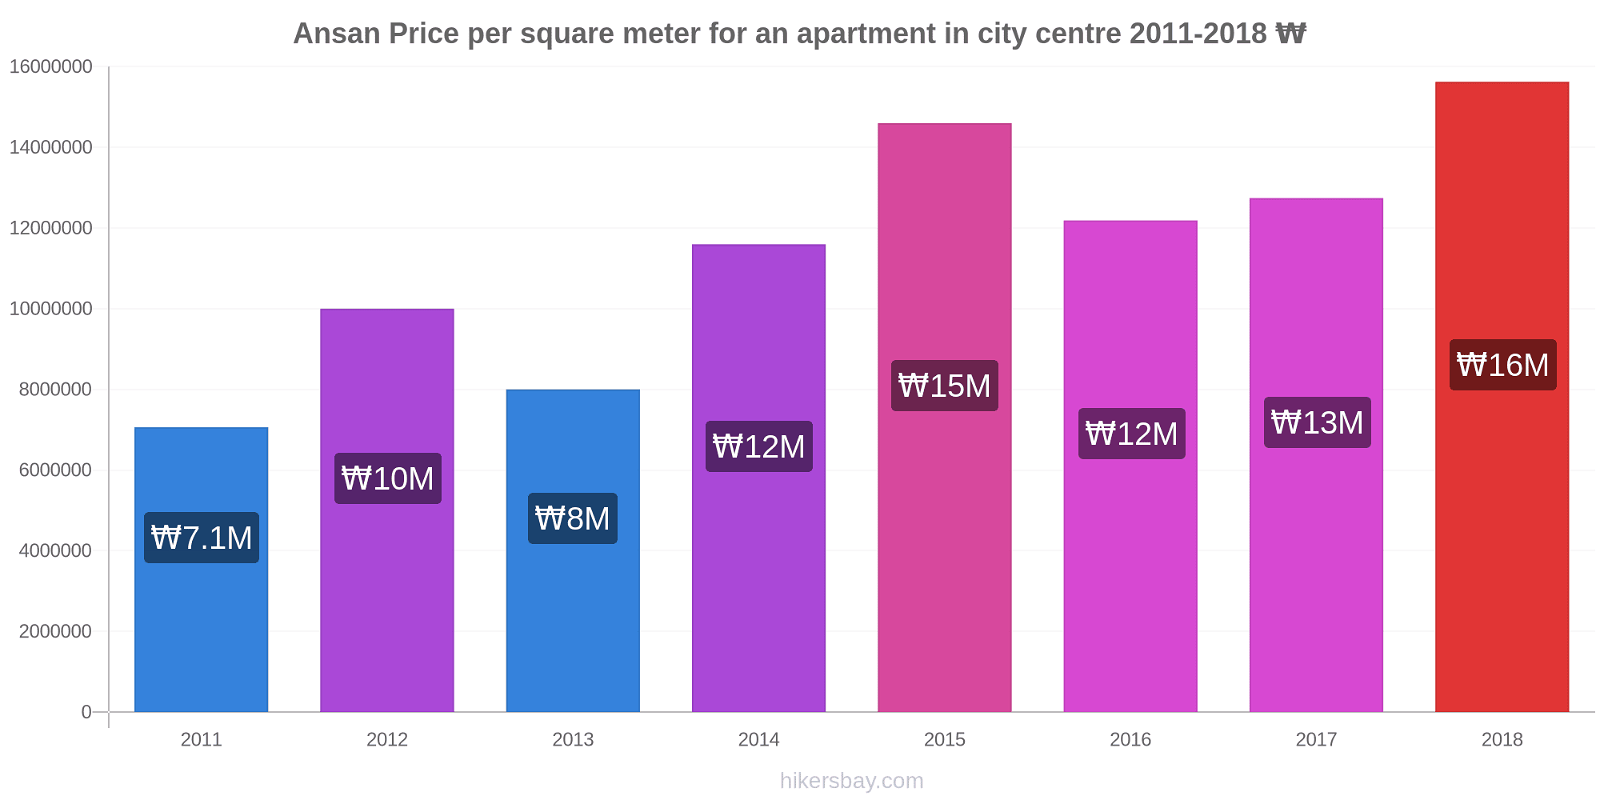 Ansan price changes Price per square meter for an apartment in city centre hikersbay.com